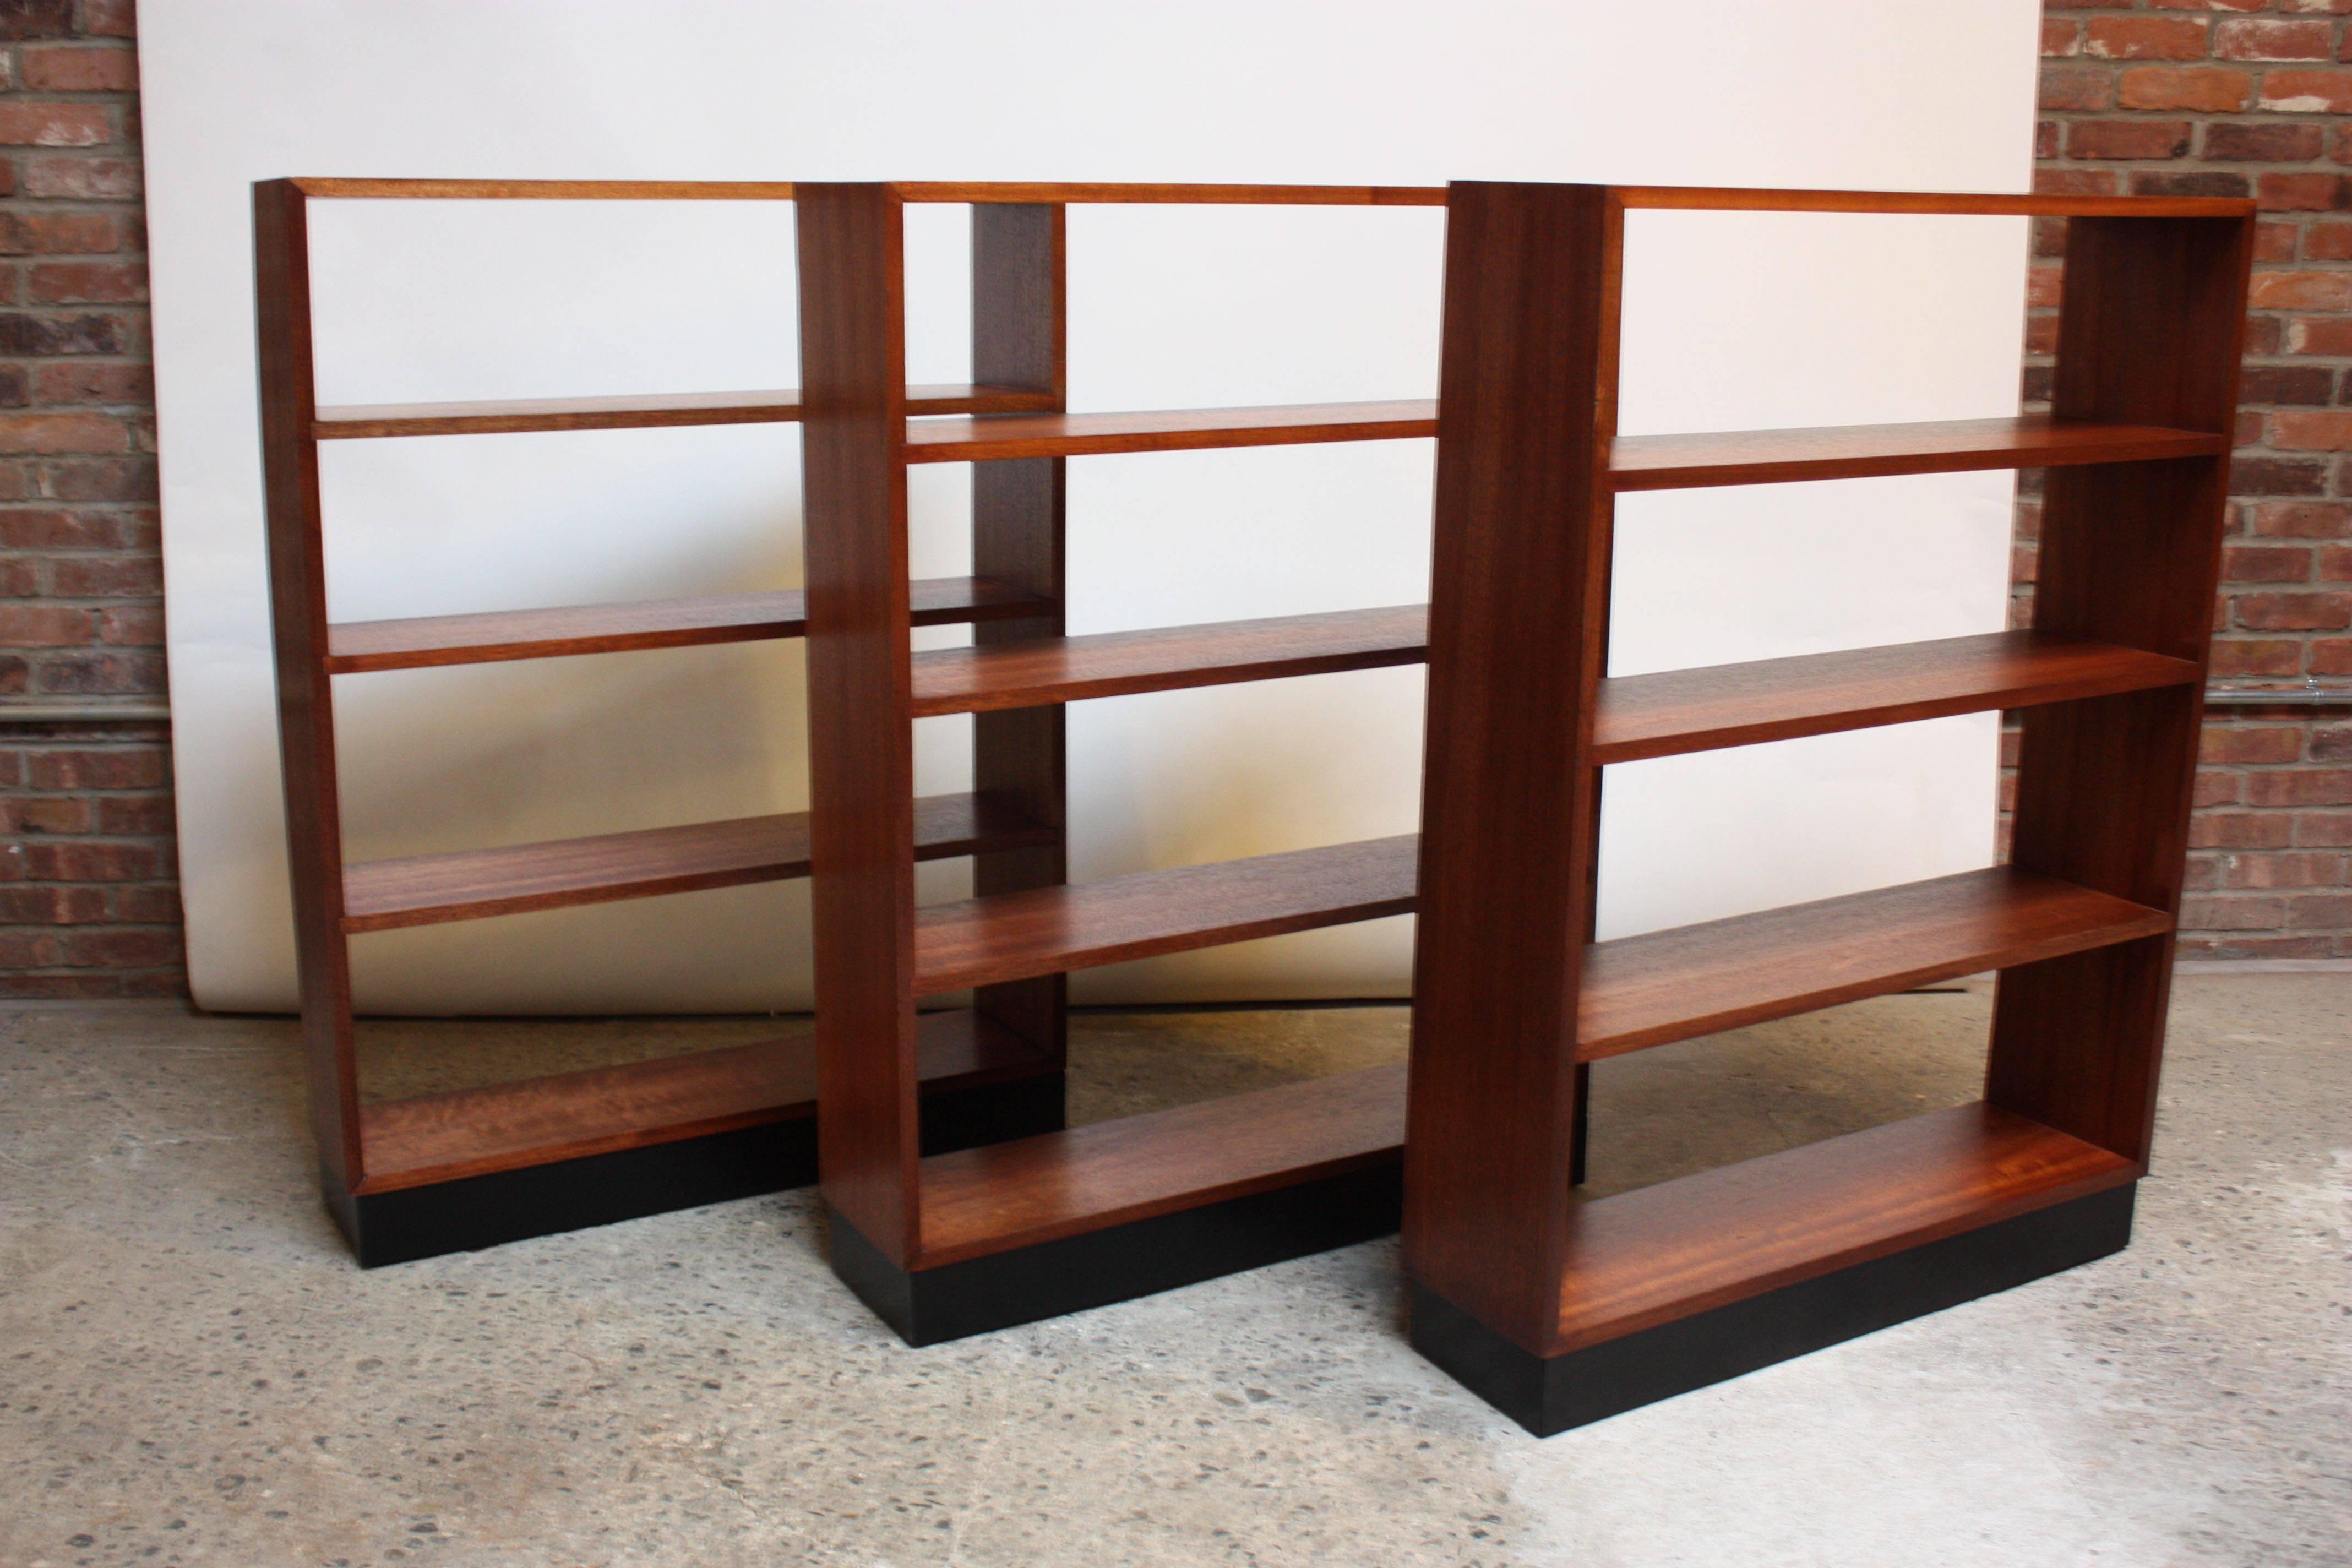 These simple open book shelves are comprised of mahogany frames atop ebonized plinth bases. The shelves are built in and cannot be adjusted. The price is for one; they are sold separately.